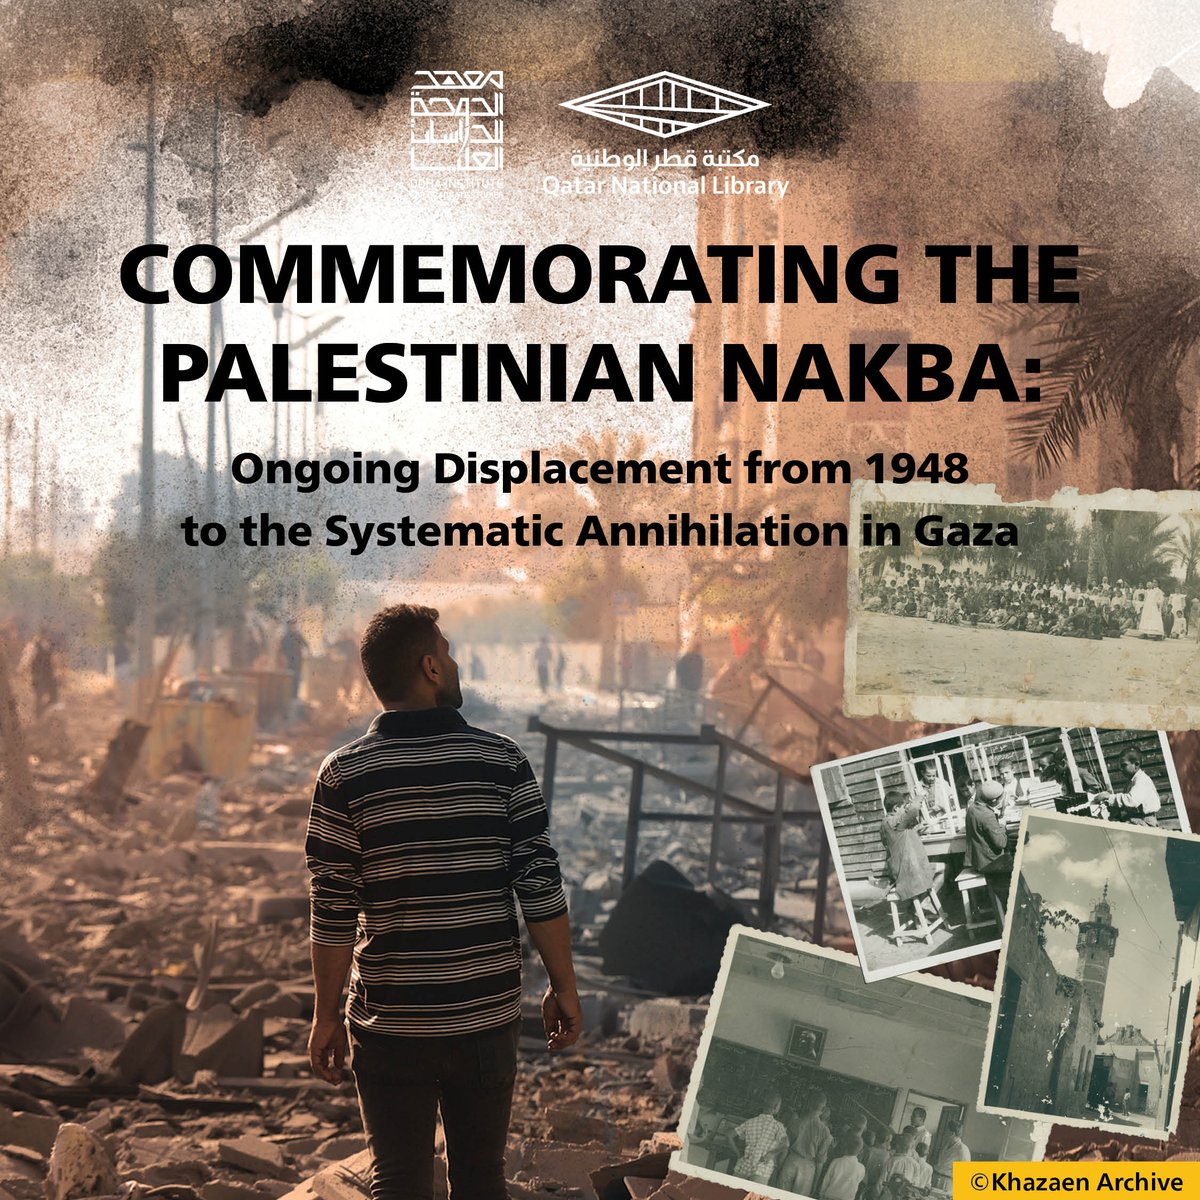 The Nakba of 1948 wasn't just a chapter in history—it's an ongoing reality for Palestinians. Join our seminar as we challenge simplistic narratives and explore the complexities of displacement and colonialism. events.qnl.qa/event/Q26wo/EN